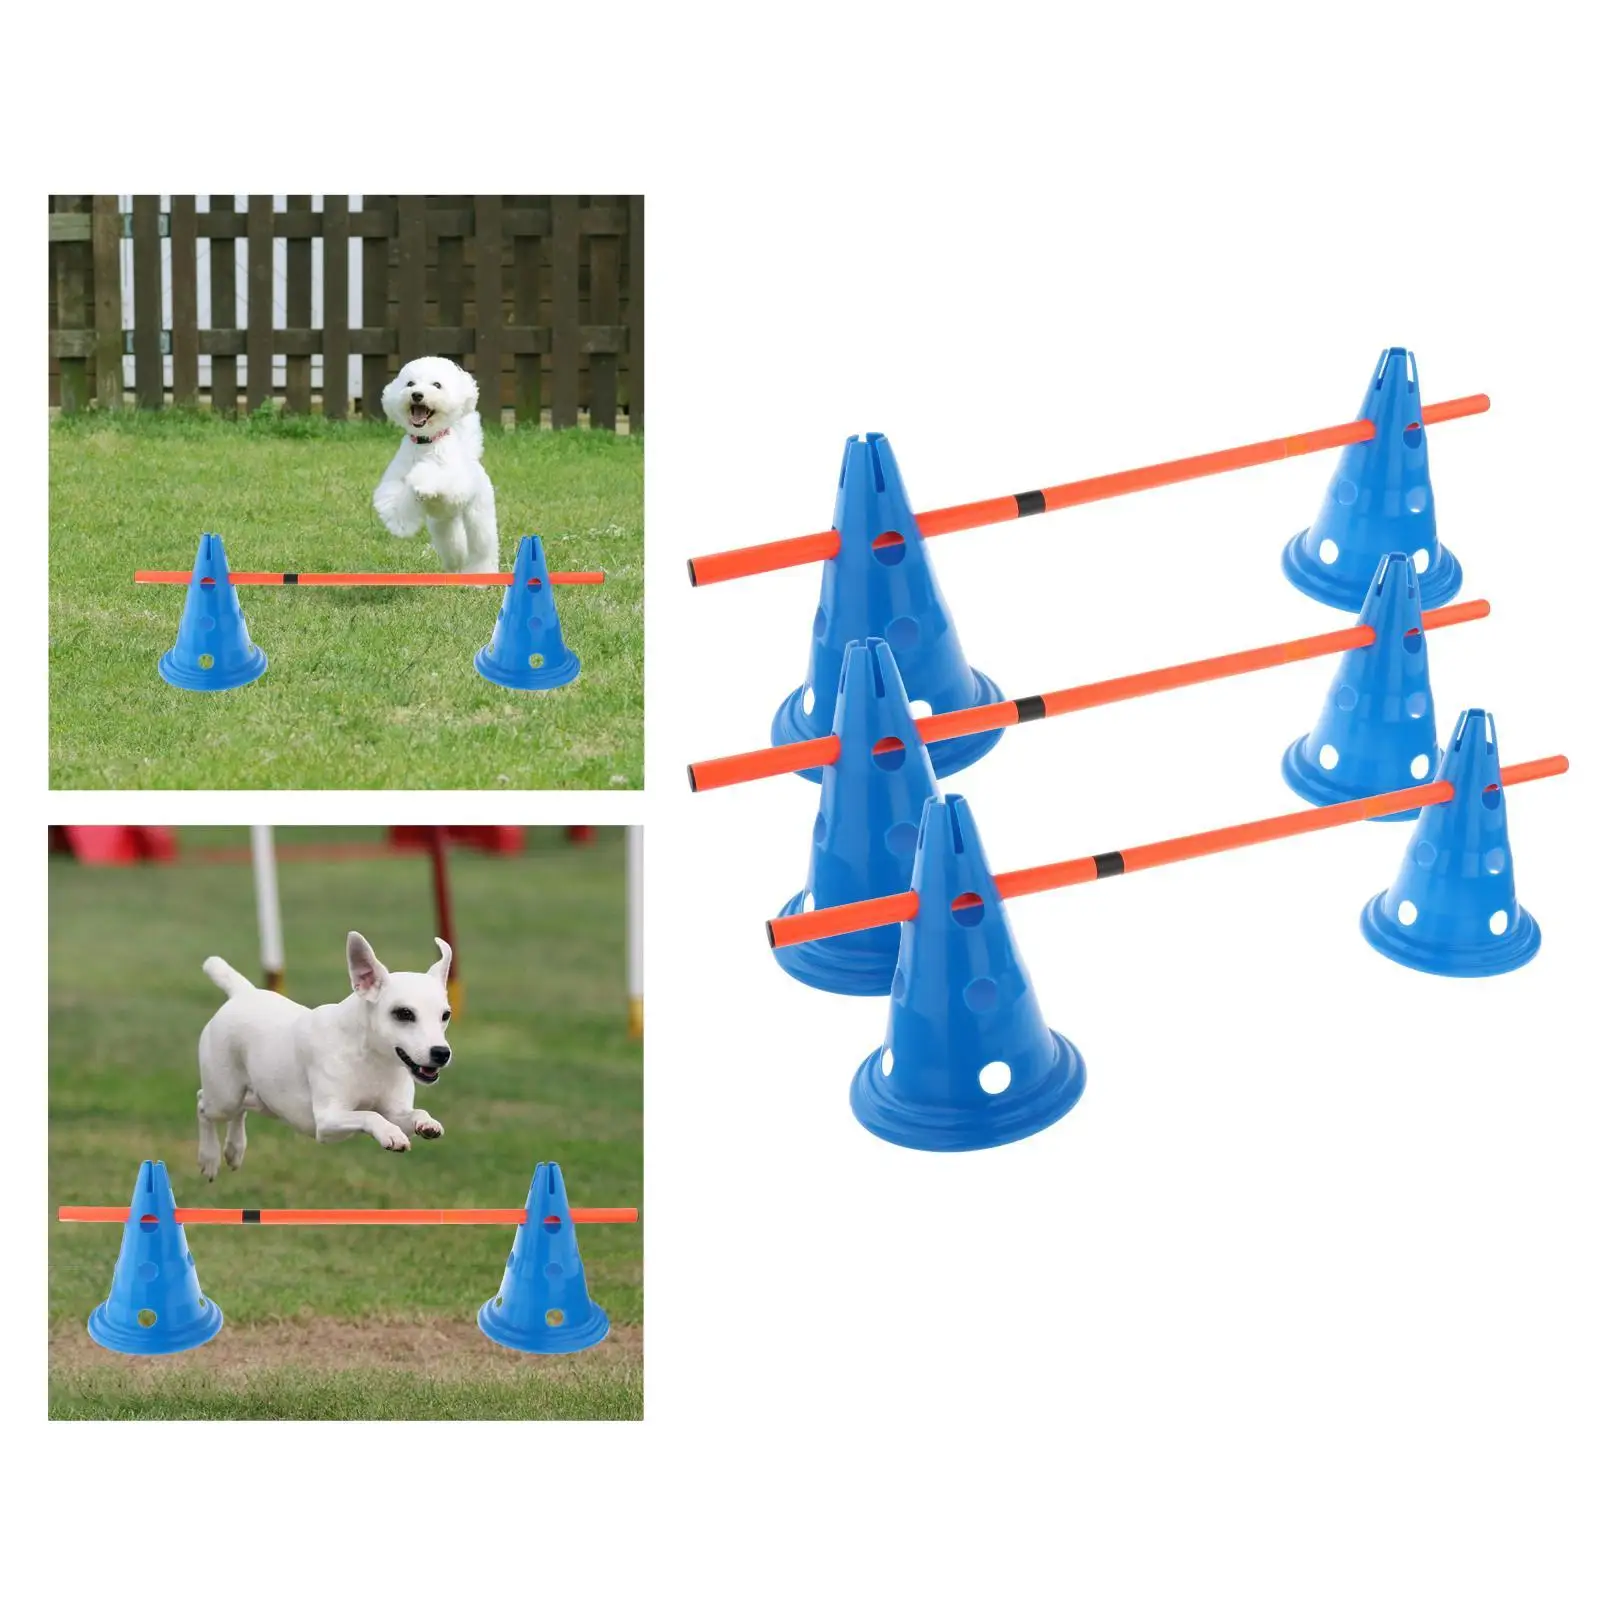 Hurdle Cones Course with Poles Adjustable Agility Equipment Set for Running